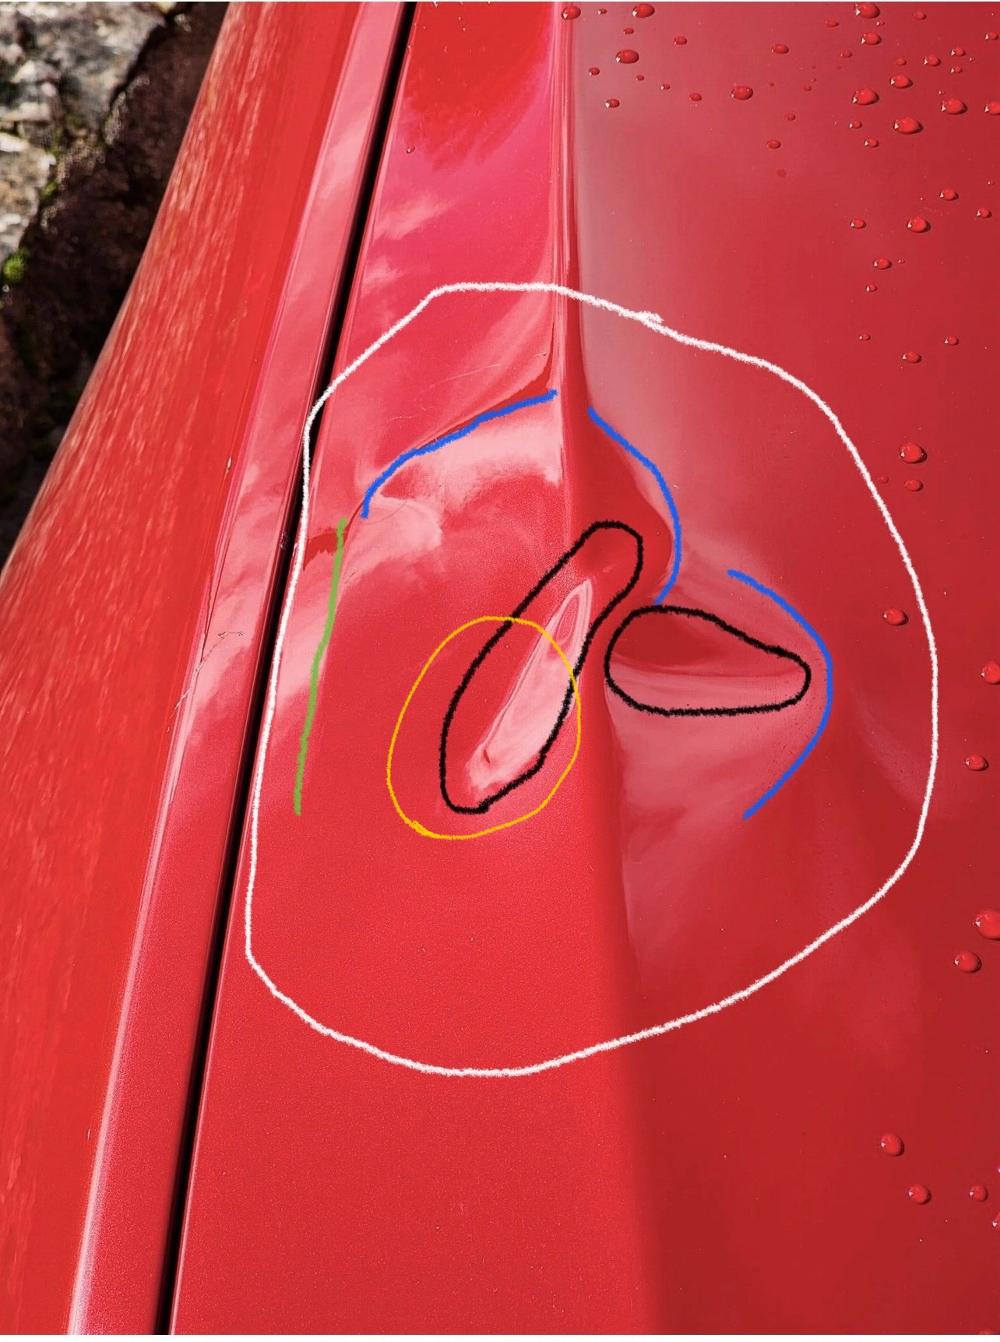 Dent removal how to